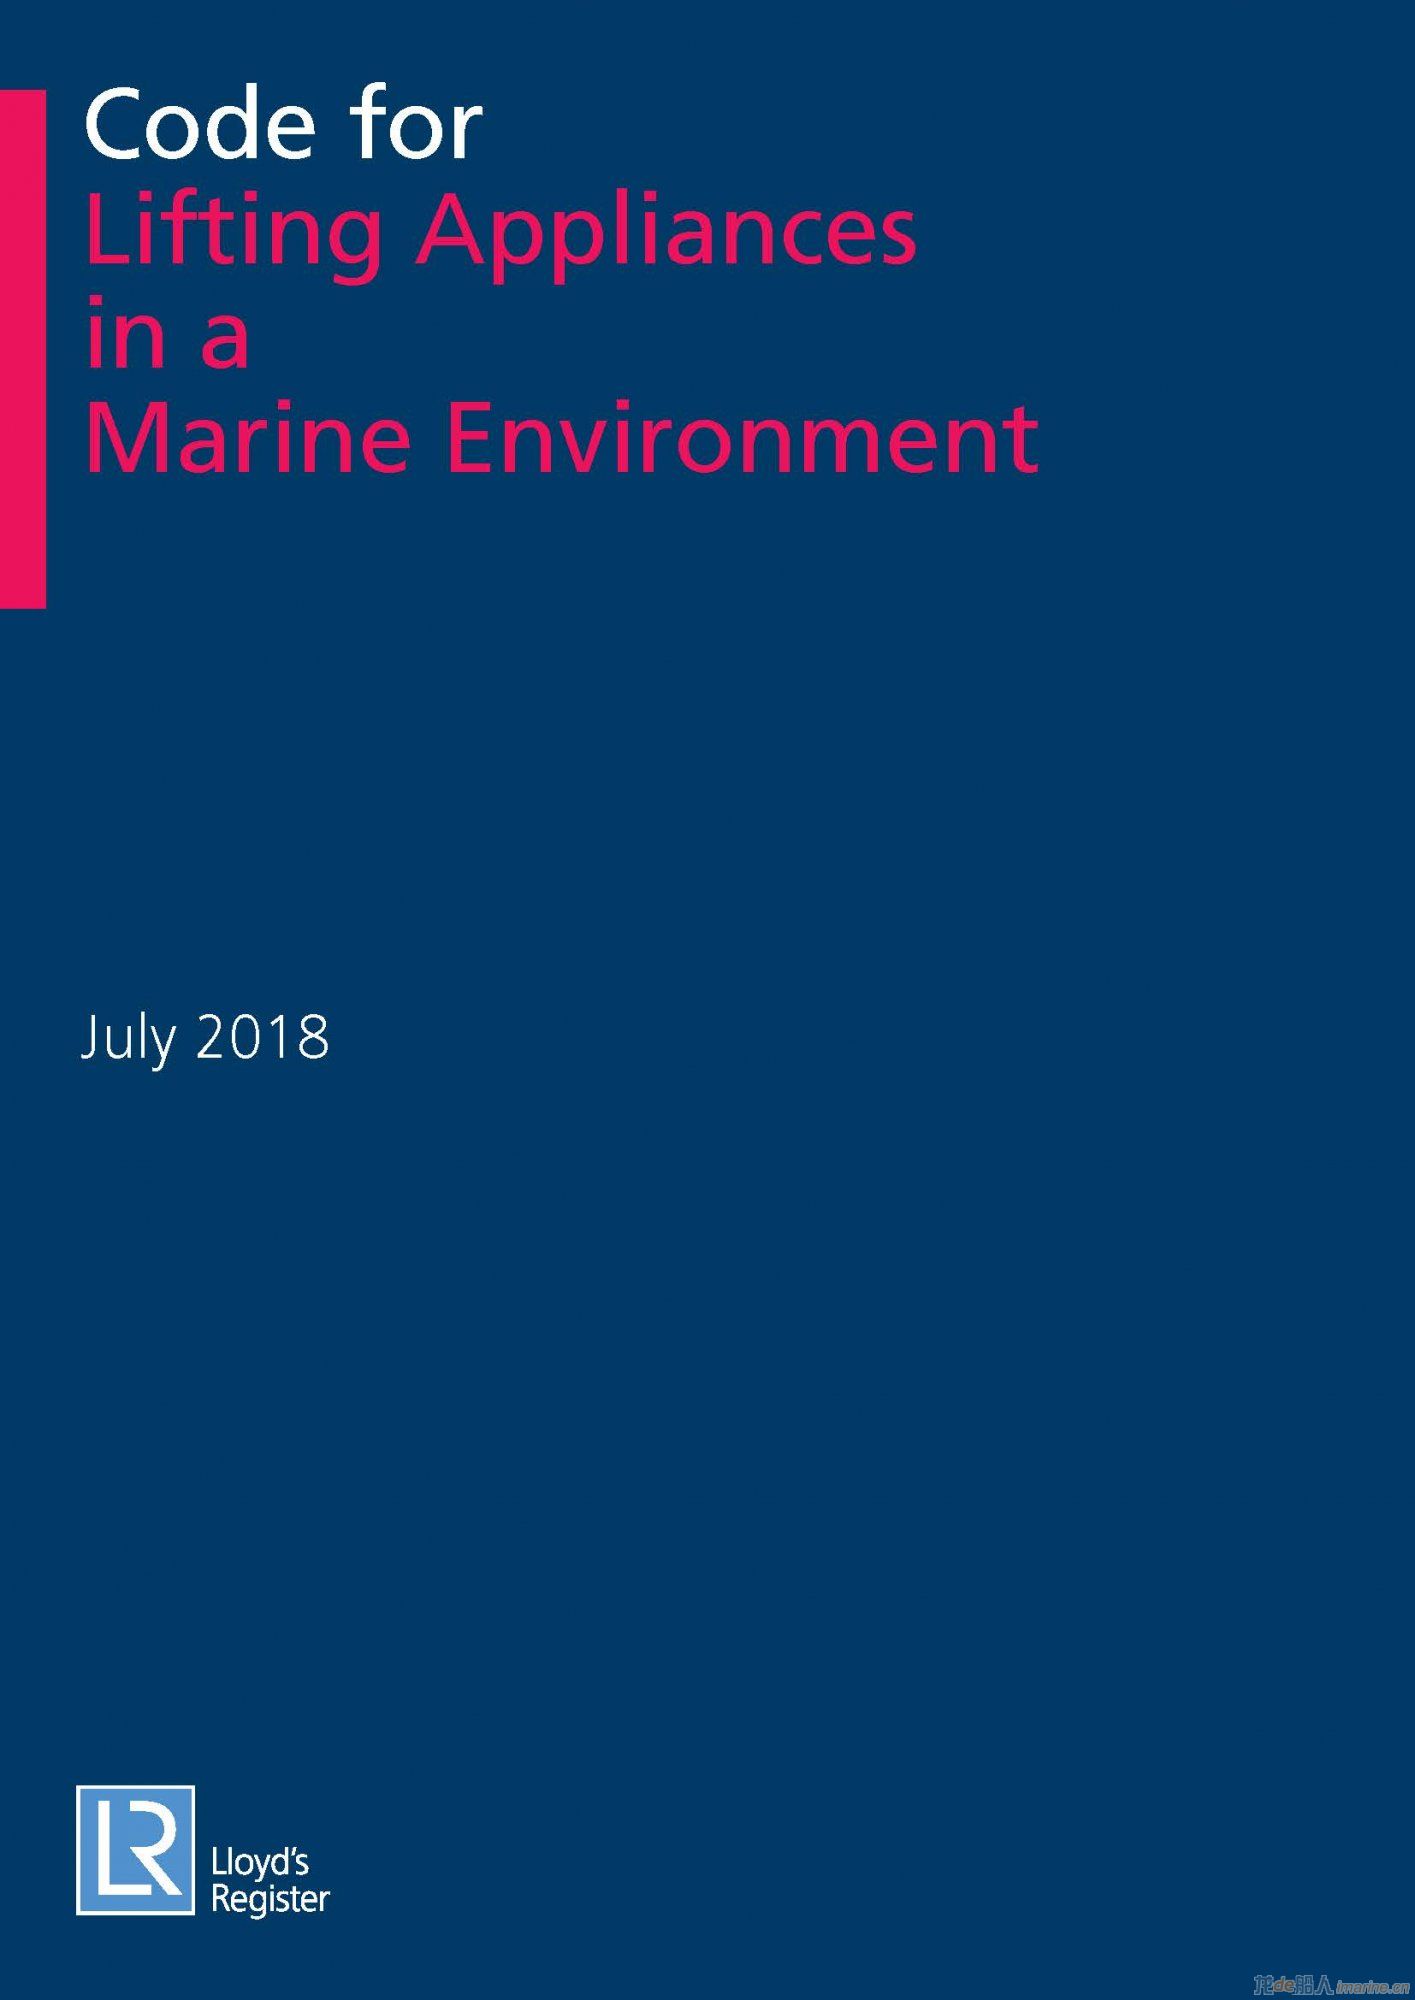 Pages from Code_for_Lifting_Appliances_in_a_Marine_Environment__July_2018.jpg